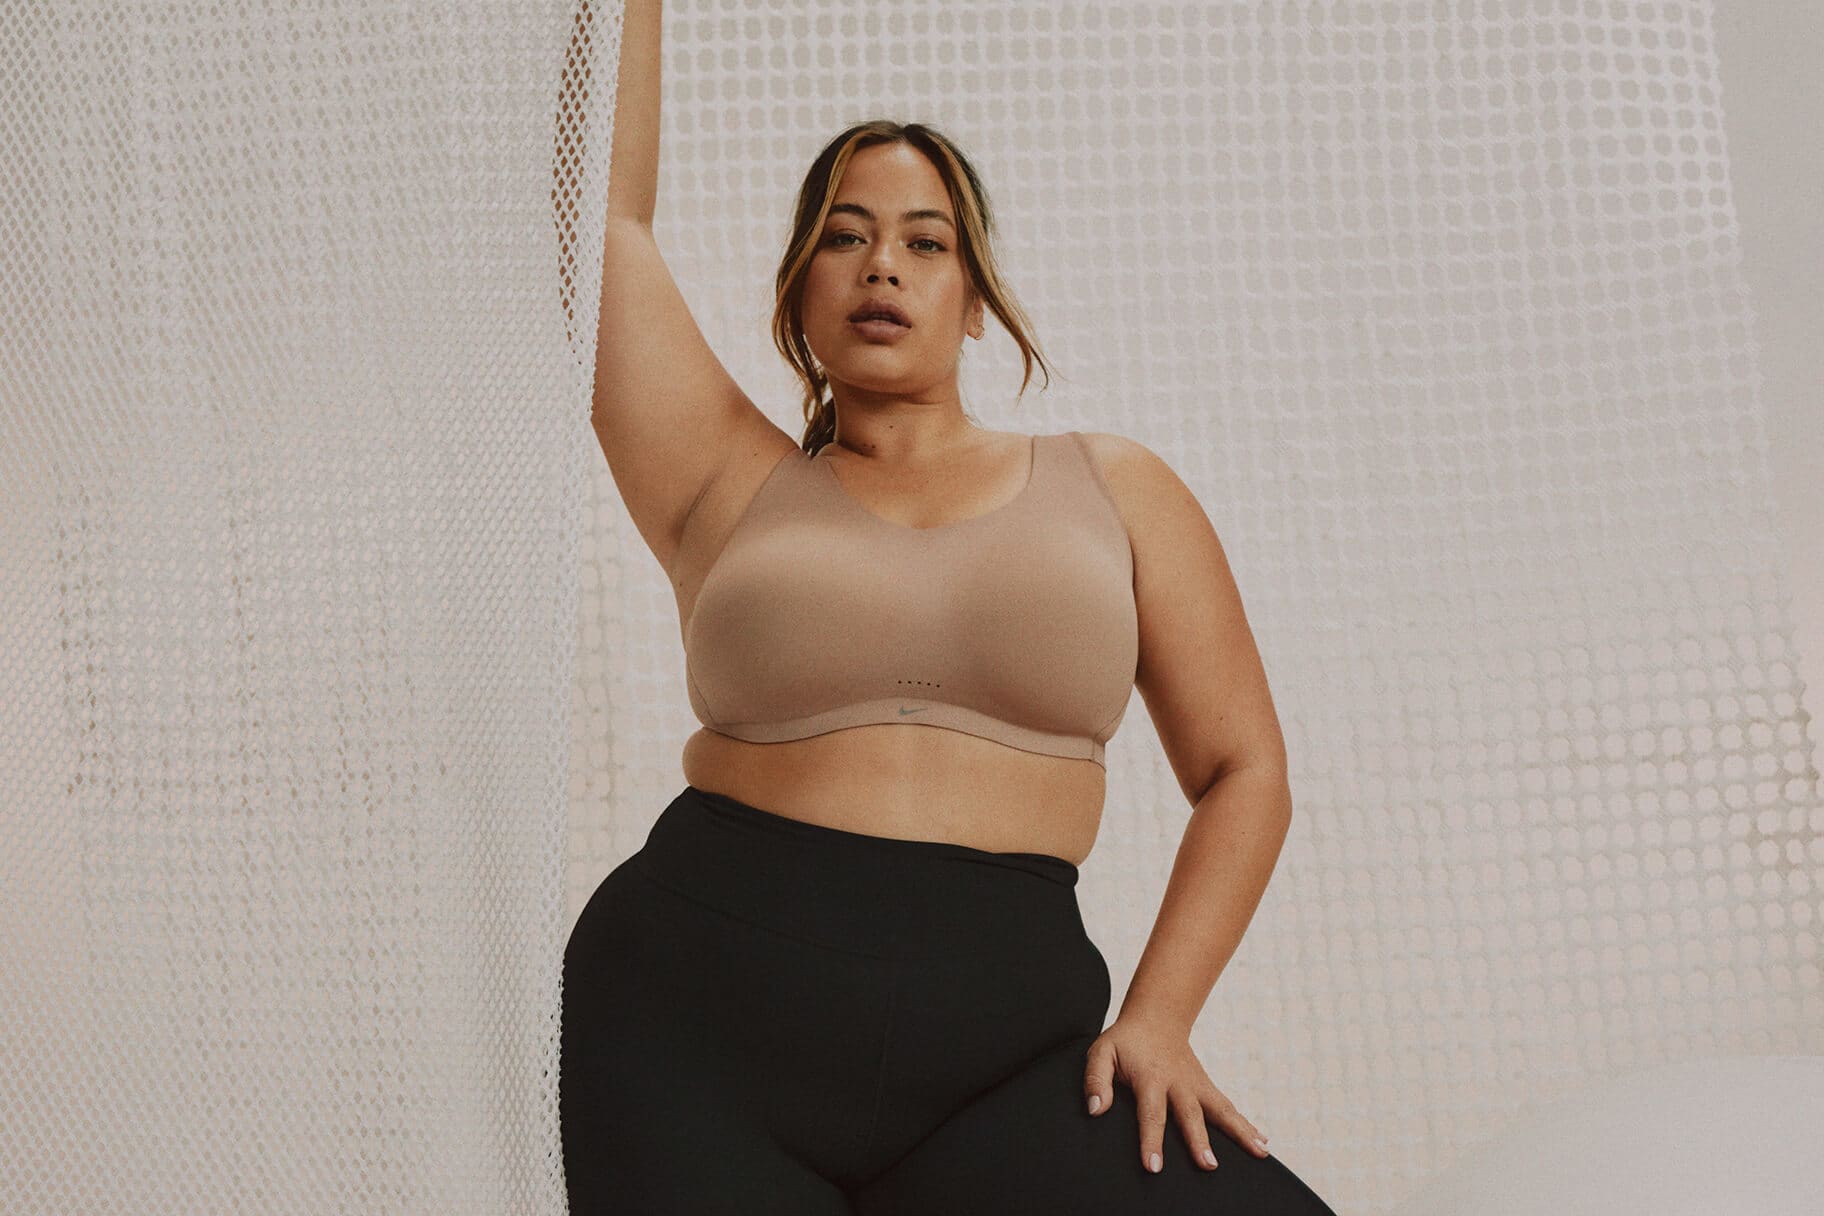 How Nike Is Redefining Its Approach to Women's Plus-Size Clothing